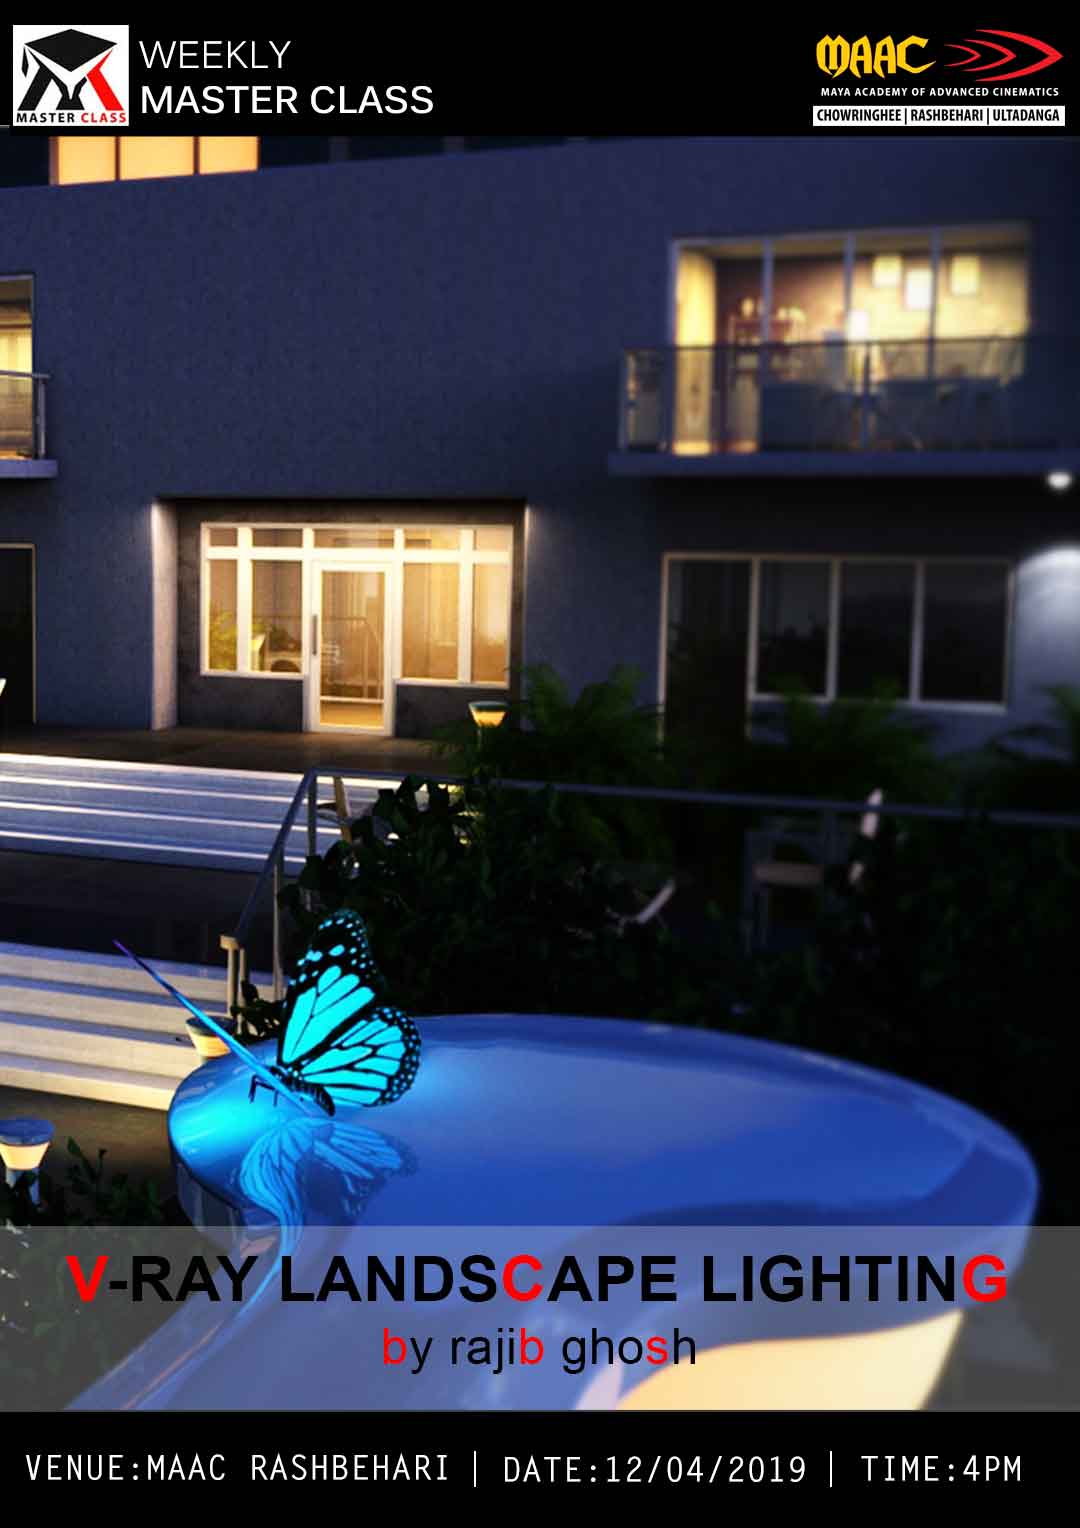 Weekly Master Class on V-Ray Landscape Lighting